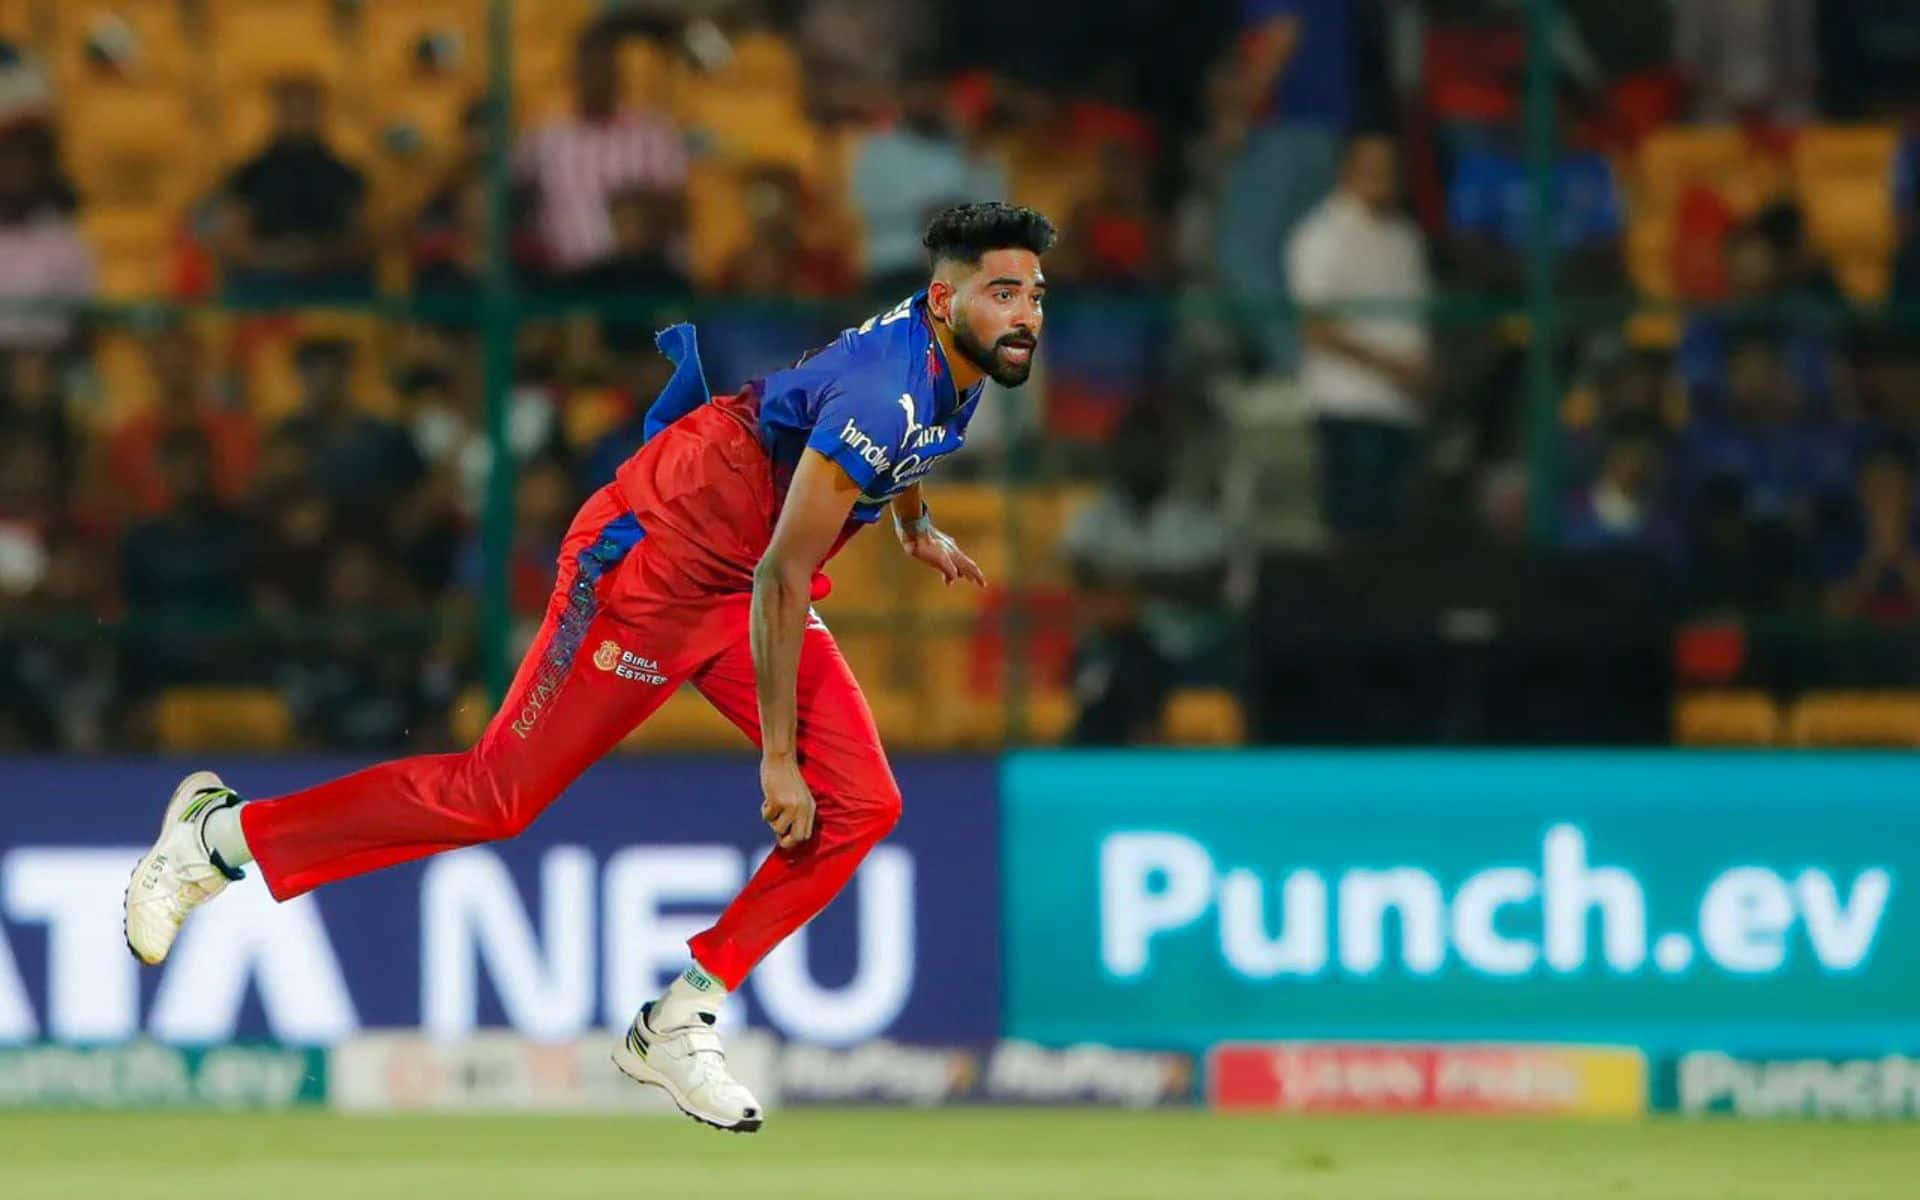 Siraj has the fourth-most wickets in the first over since IPL 2020 (X.com)